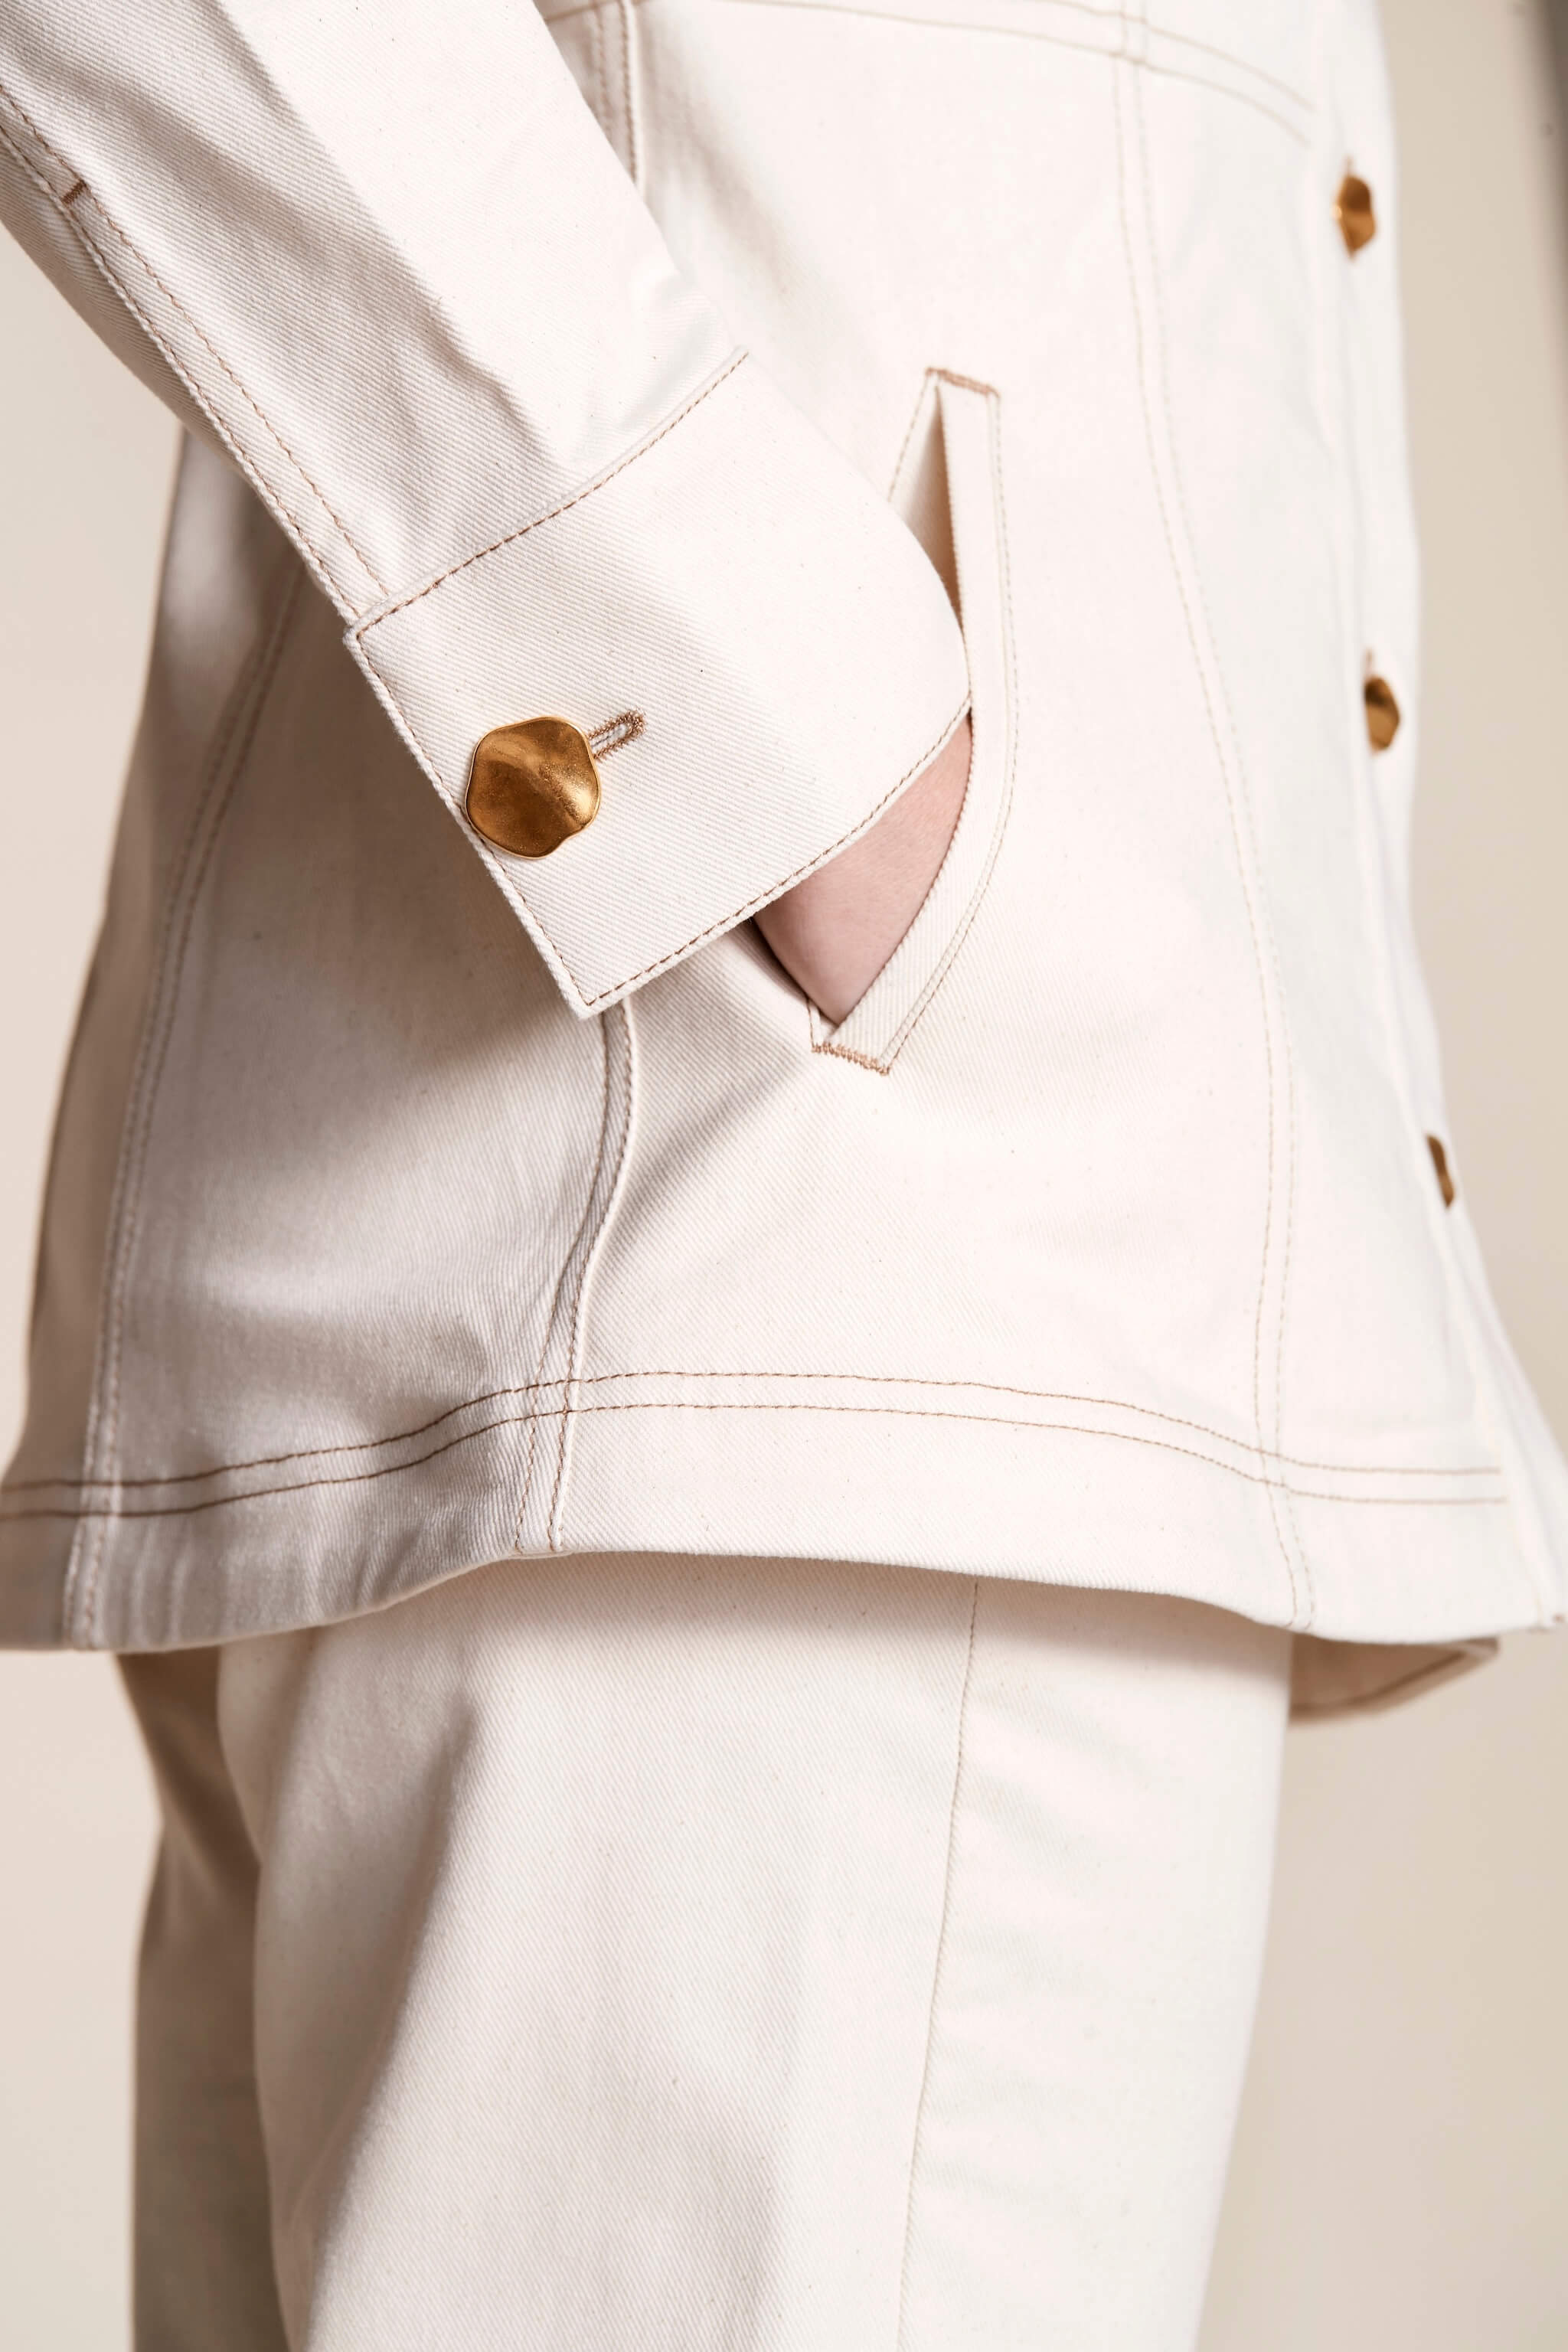 Detail shot of Cyme Copenhagen's cream denim jacket cuff with a unique gold button, showcasing the brand's attention to quality materials and sustainable fashion in women's clothing from a Danish designer.